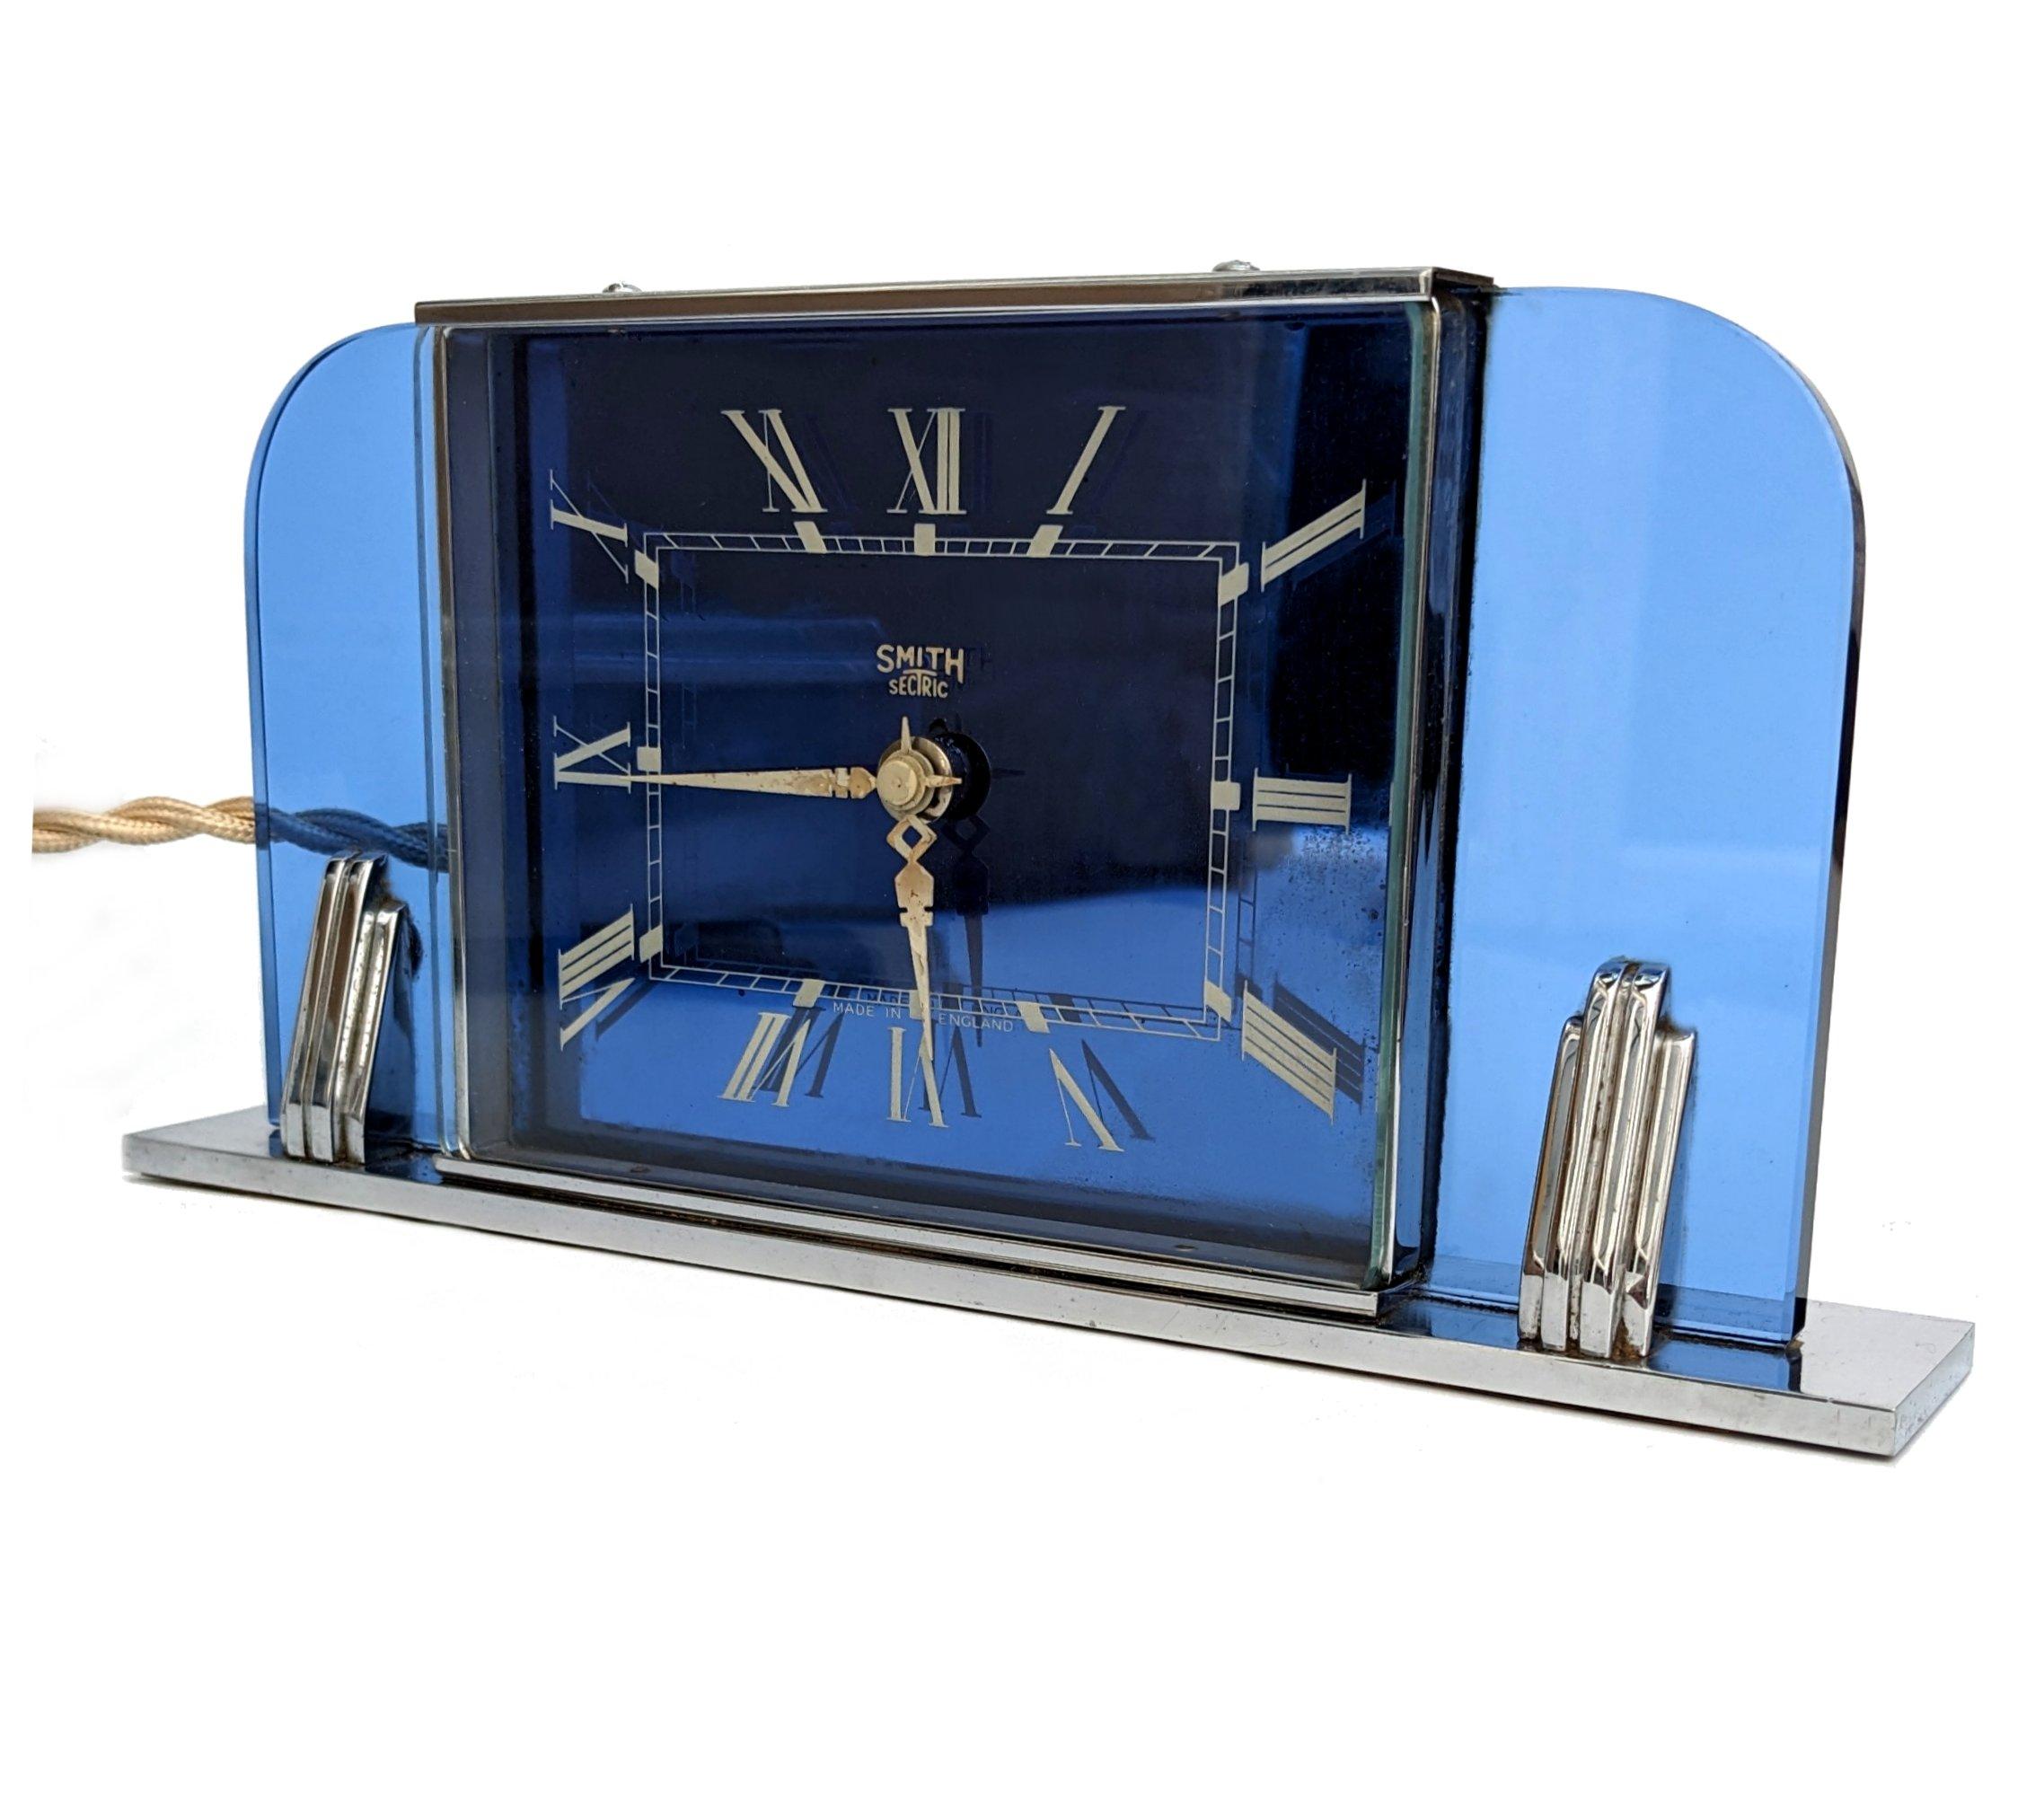 Very attractive and totally authentic 1930s Art Deco Smith's mantel clock dating from 1937 or soon thereafter. This clock has a wonderful blue glass case with a very heavy chrome base and chrome uprights. This clock is electric and working with good